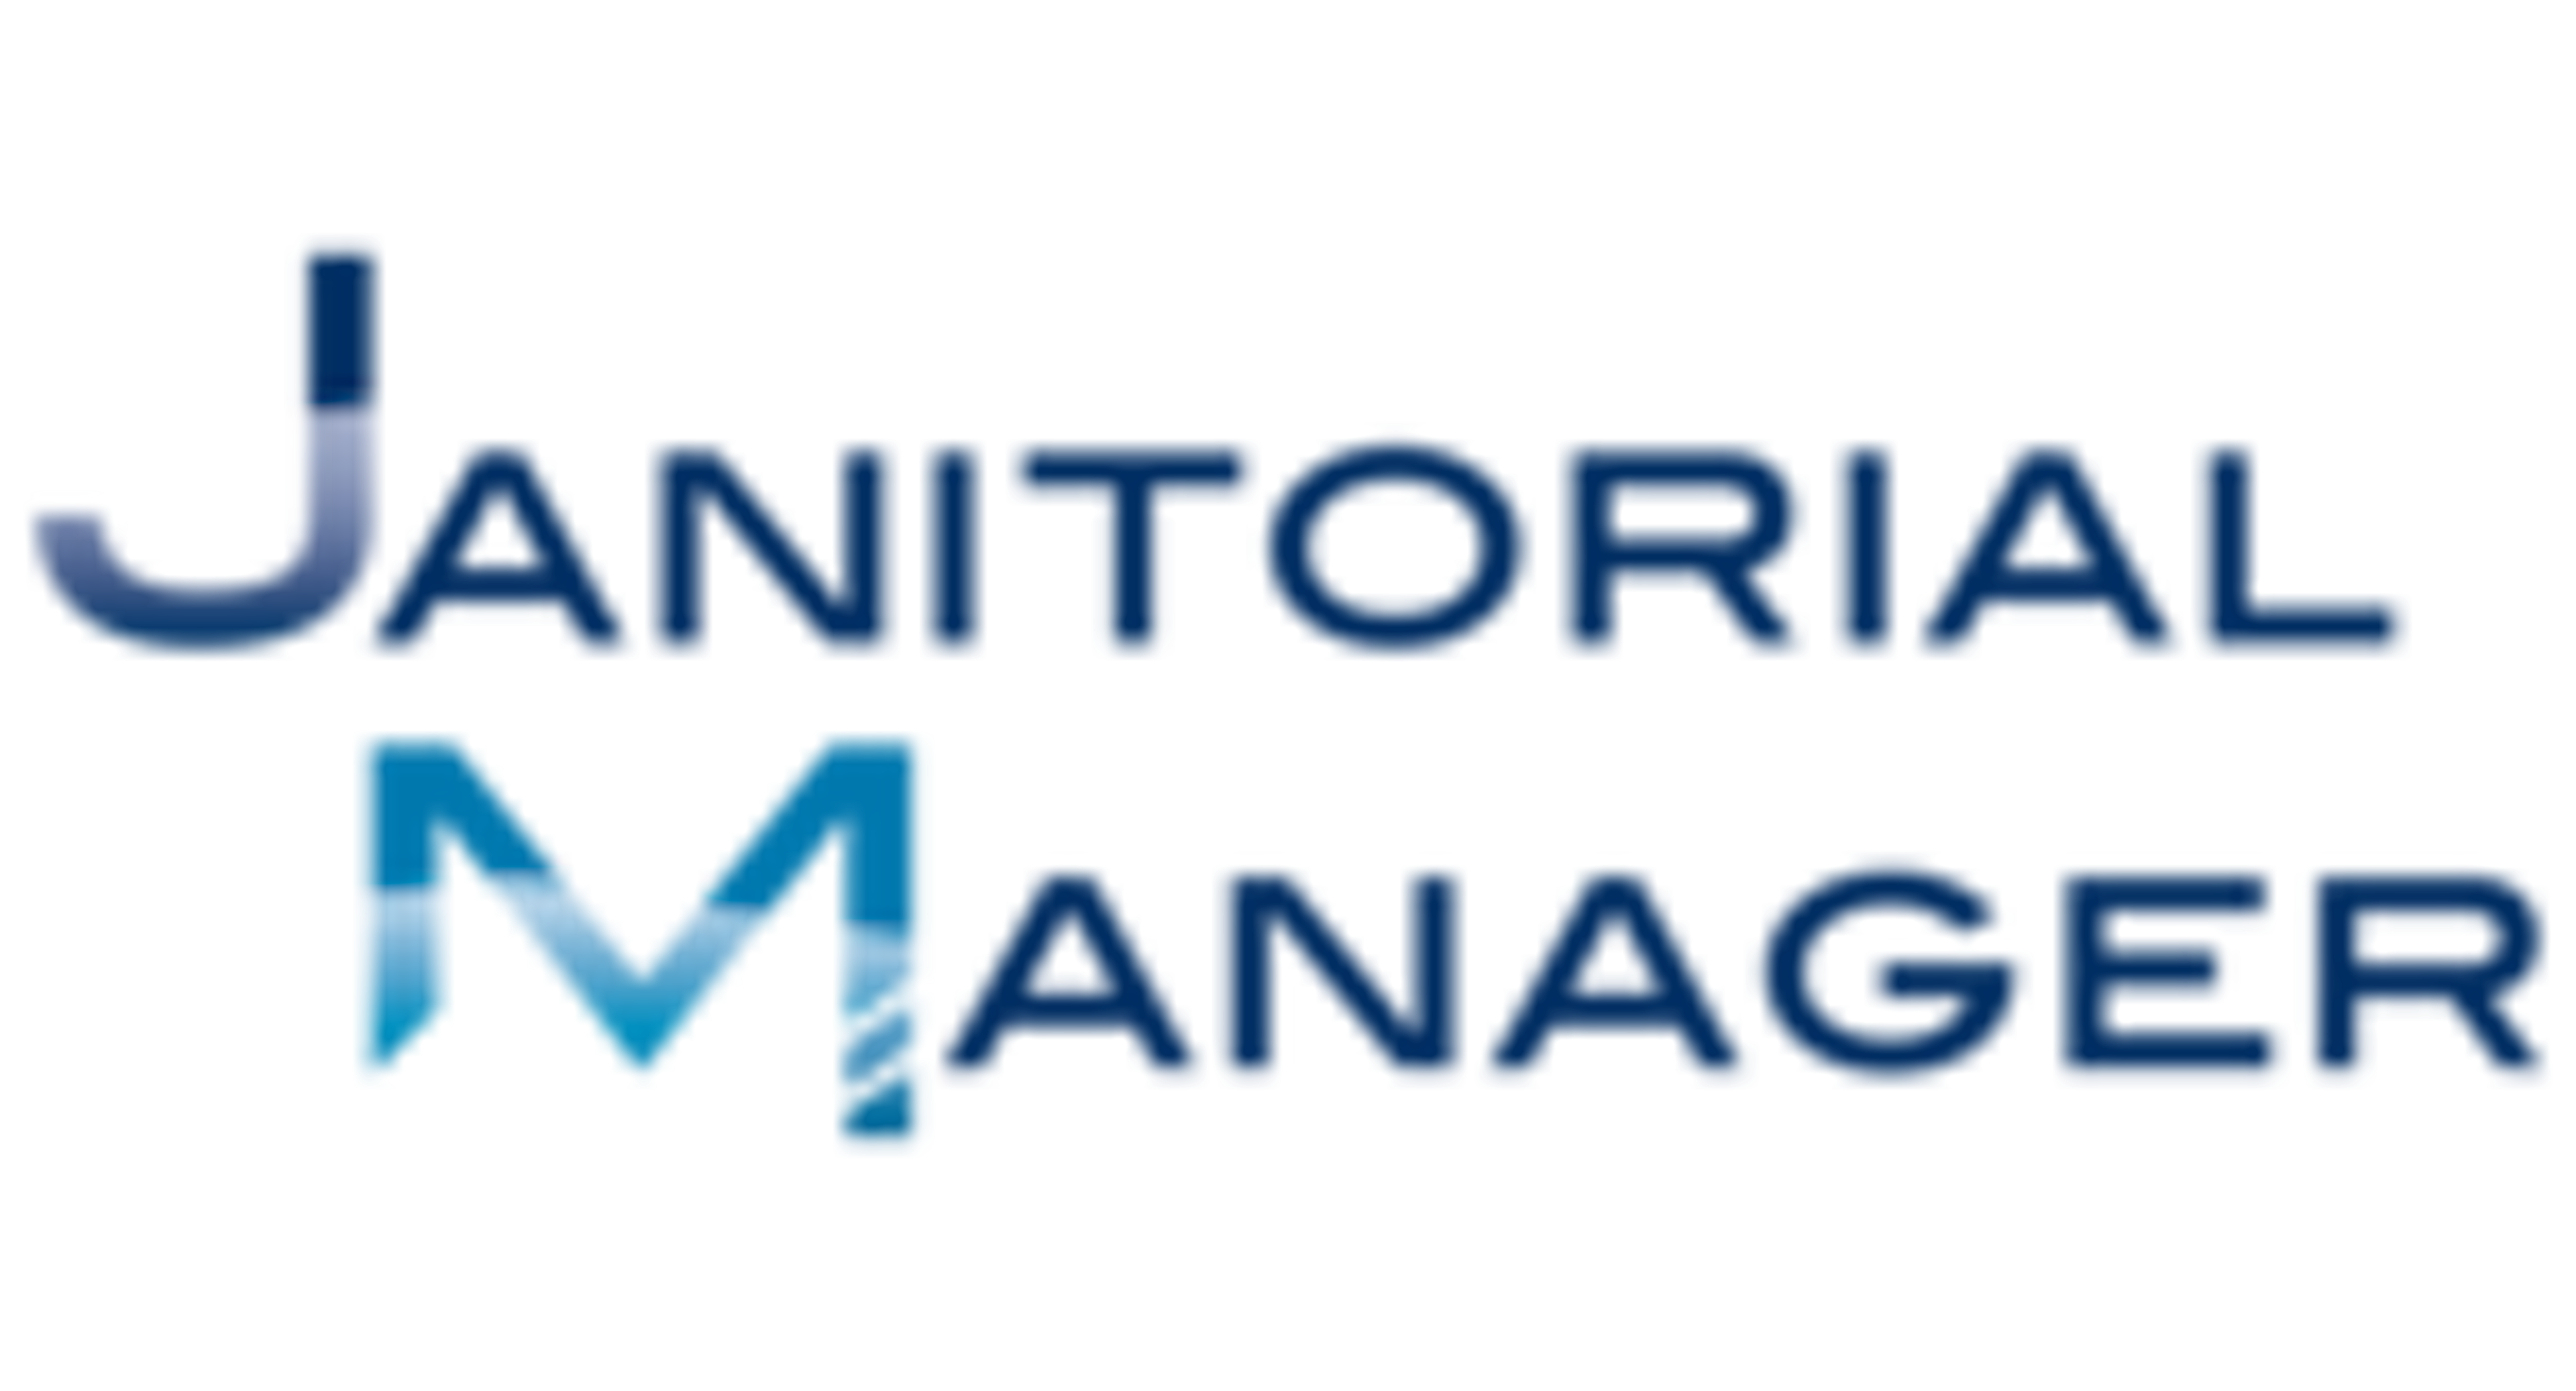 Janitorial Manager Logo